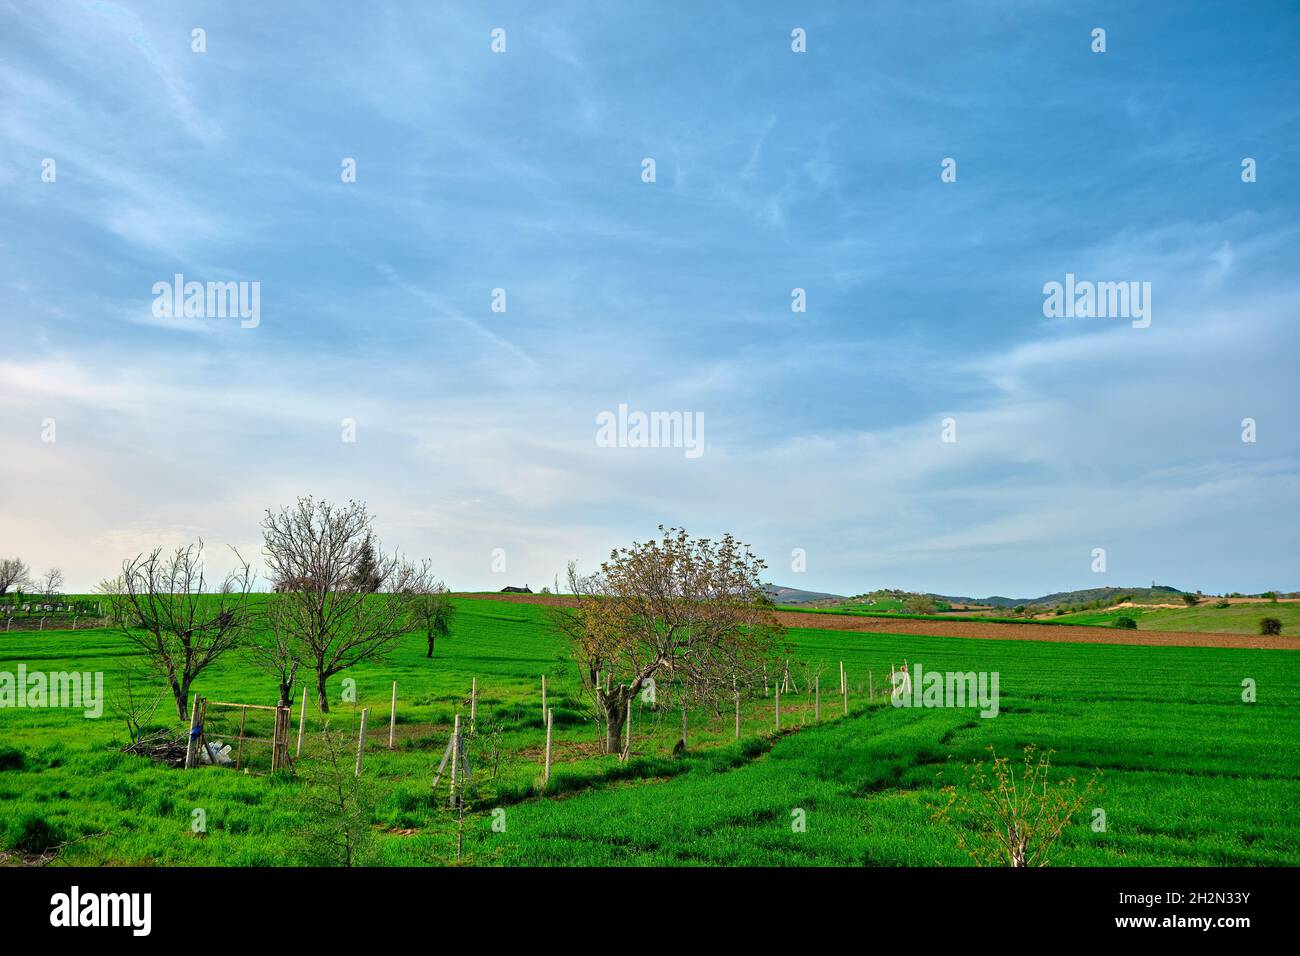 Agricultural field with green plants and grass and small harvesting area covered by fences in Bursa Turkey during sunset and blue sky background. Stock Photo